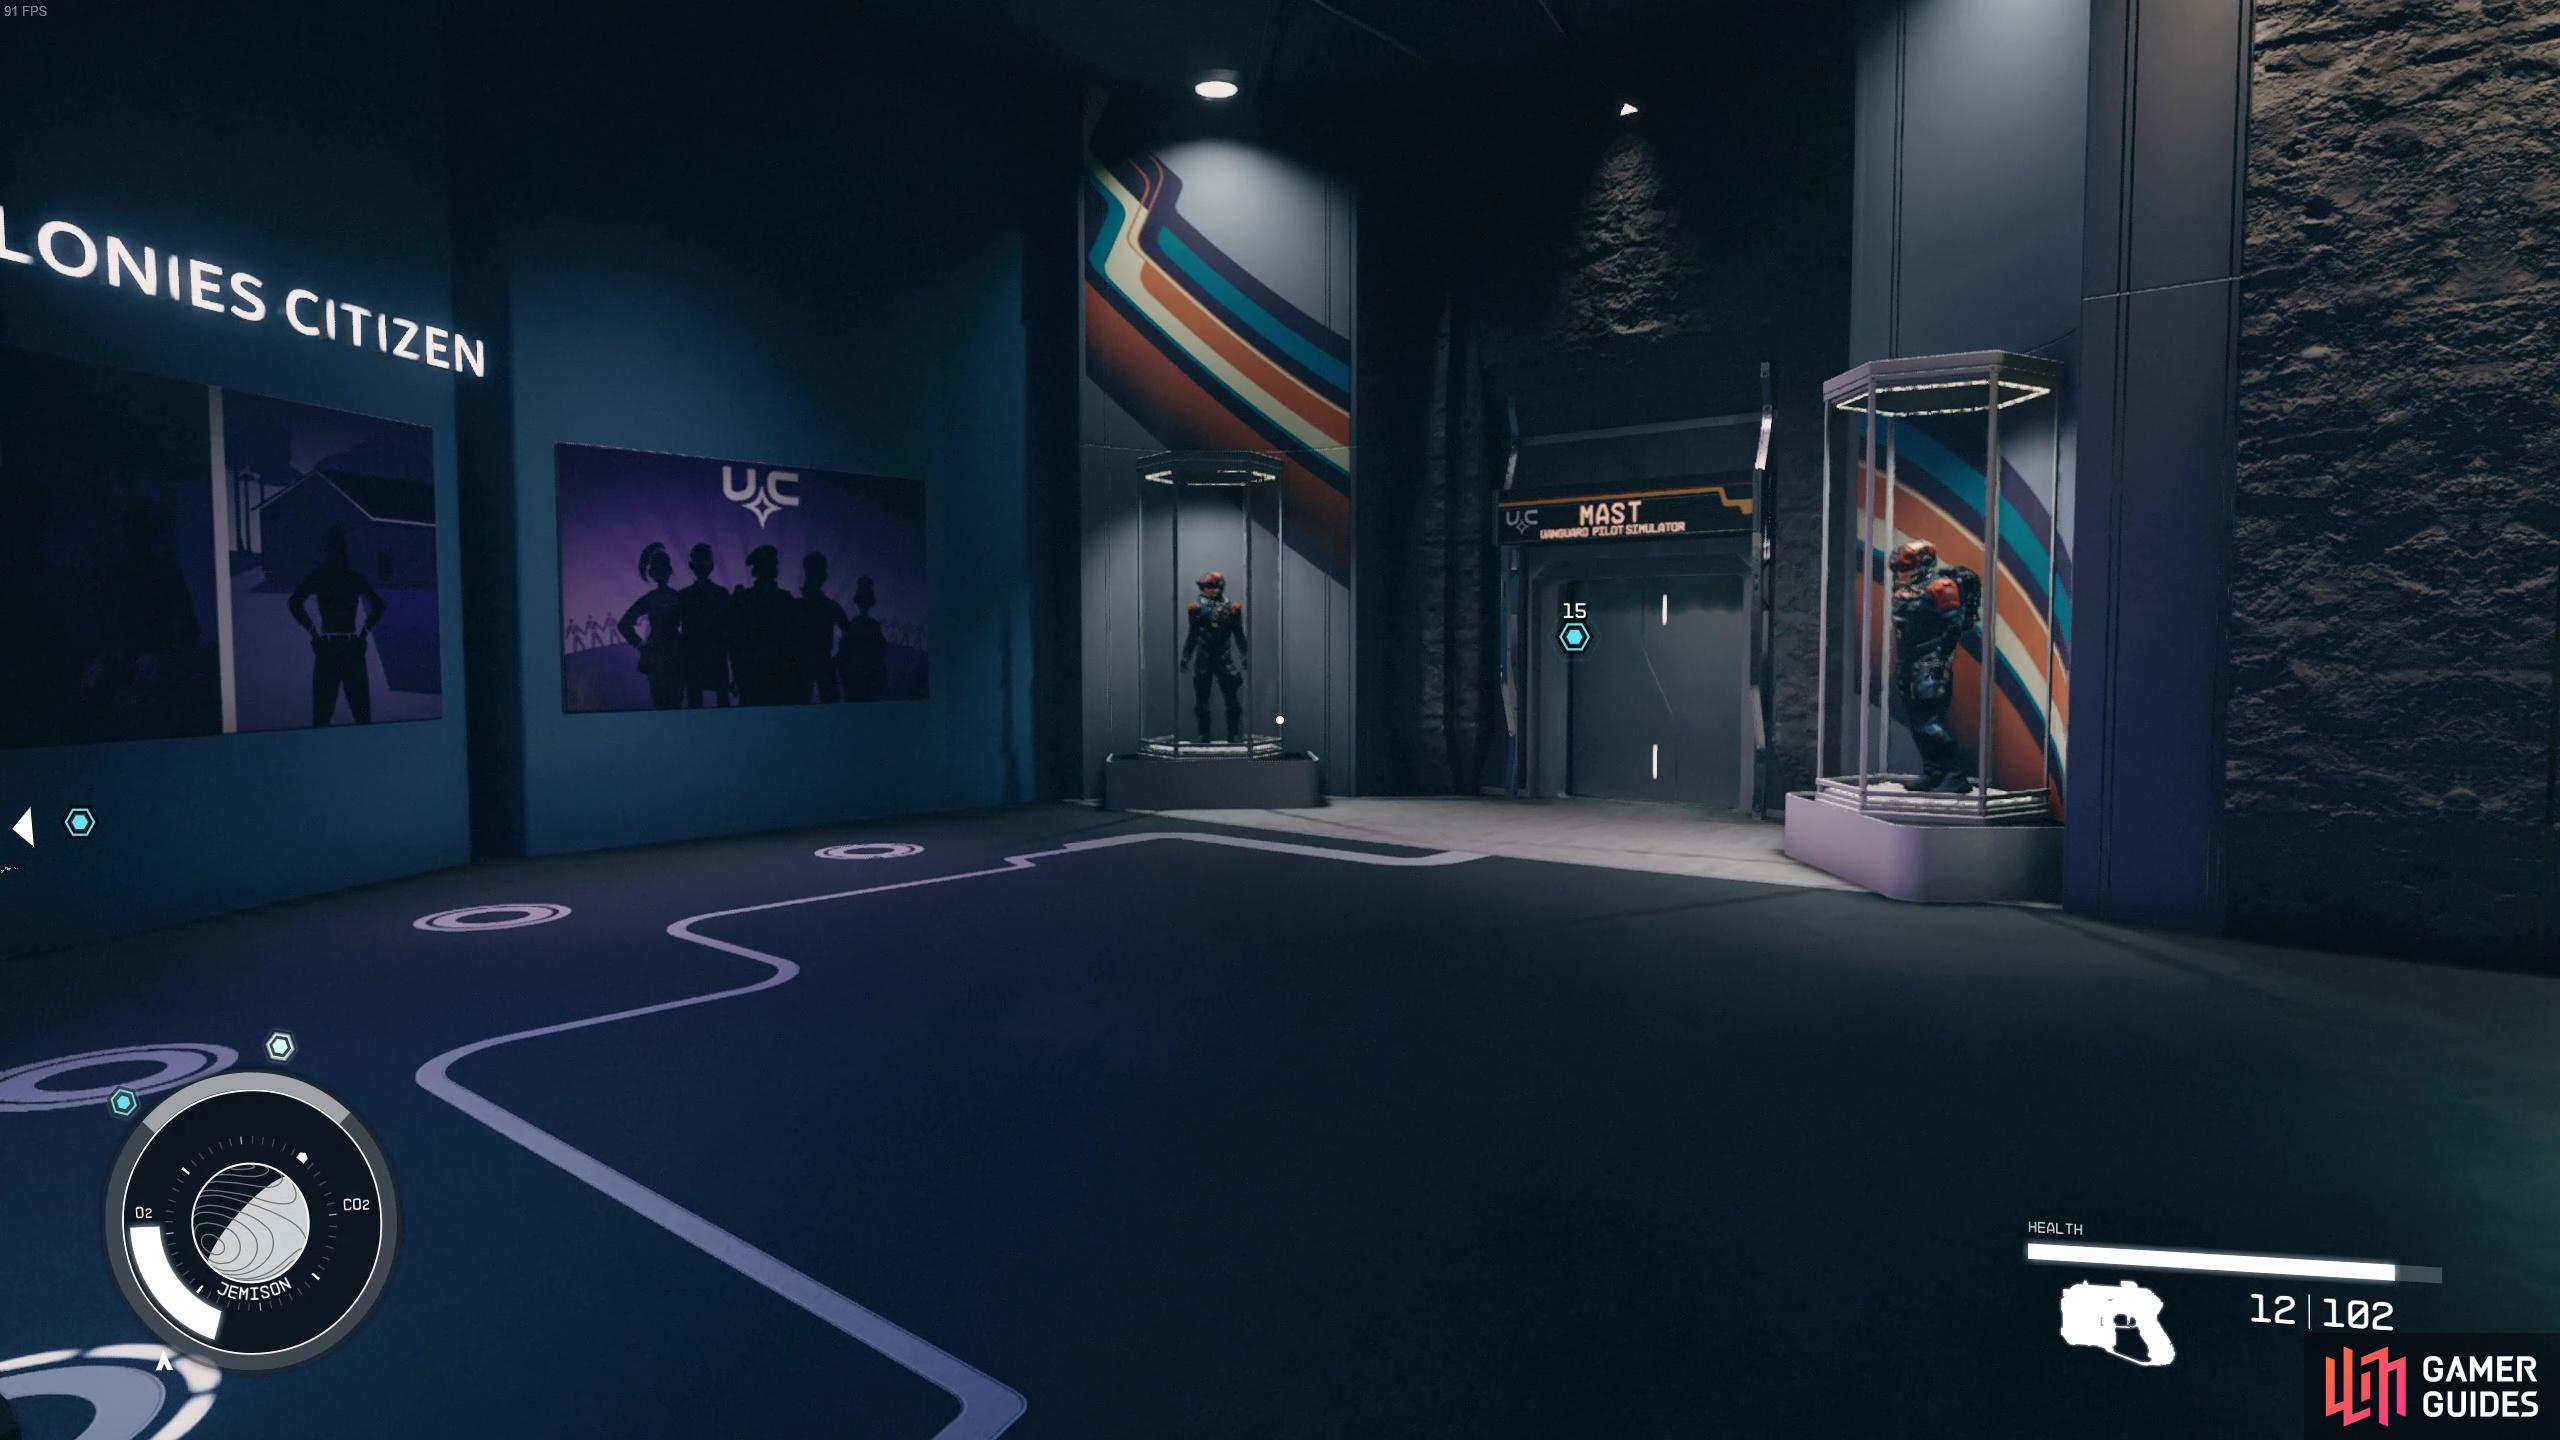 Once you're ready/had your fill of lore, head over to the flight simulation room. 